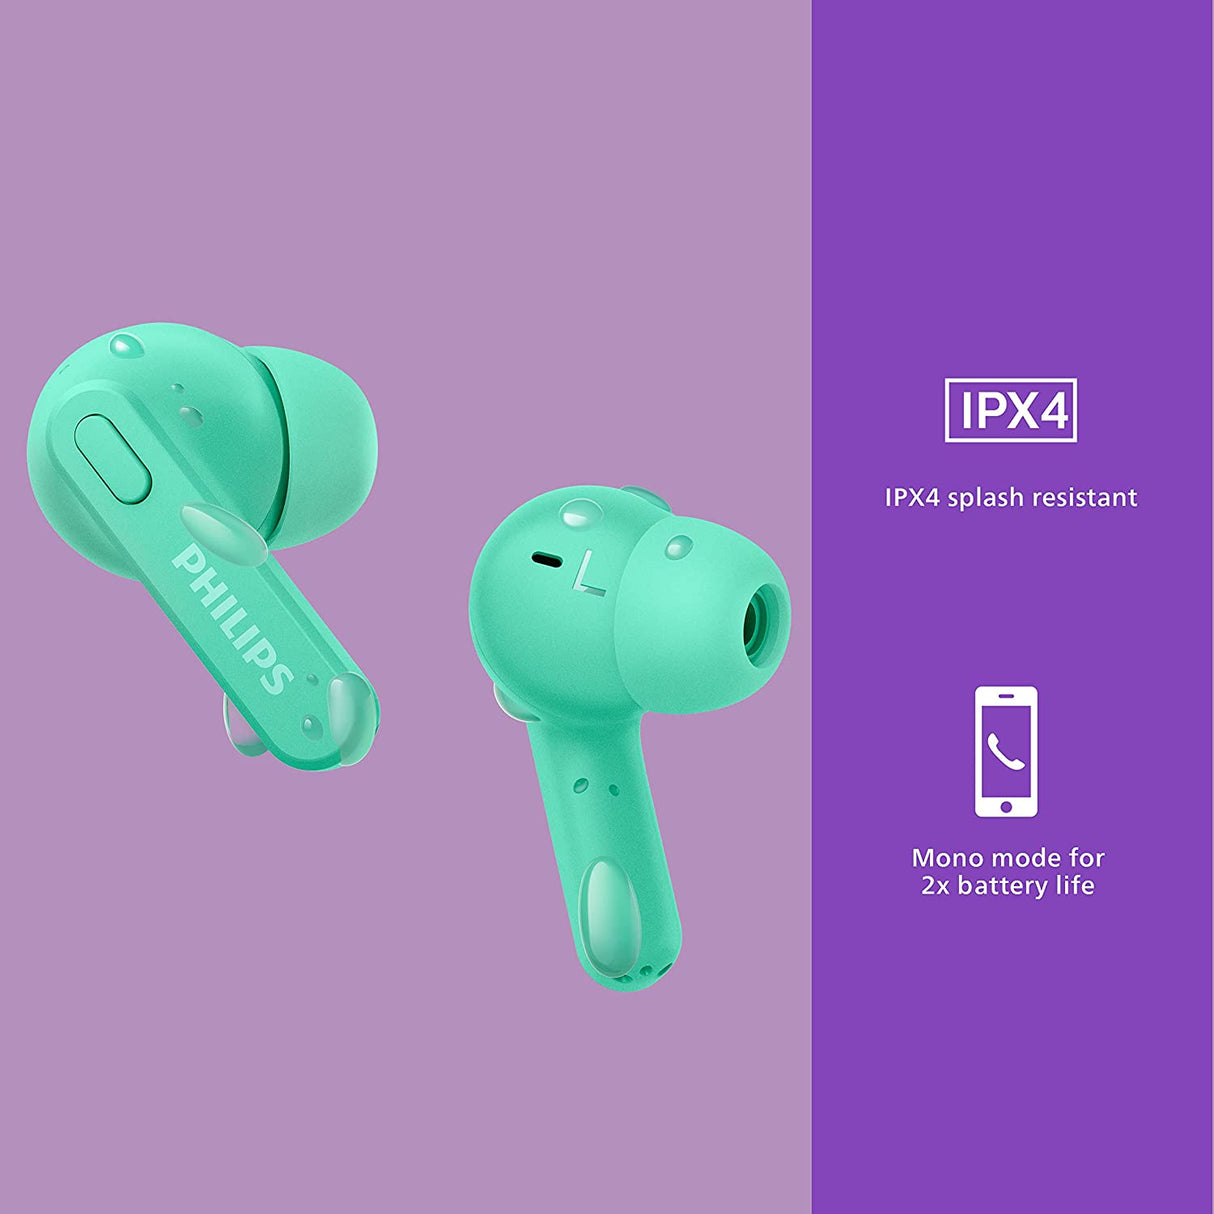 Philips T2206 True Wireless Headphones with IPX4 Water Resistance, Super-Small Charging case, Integrated Controls, Built-in Microphone, Up to 18 Hours Playtime, TAT2206GR In-Ear with Tip Minty Green